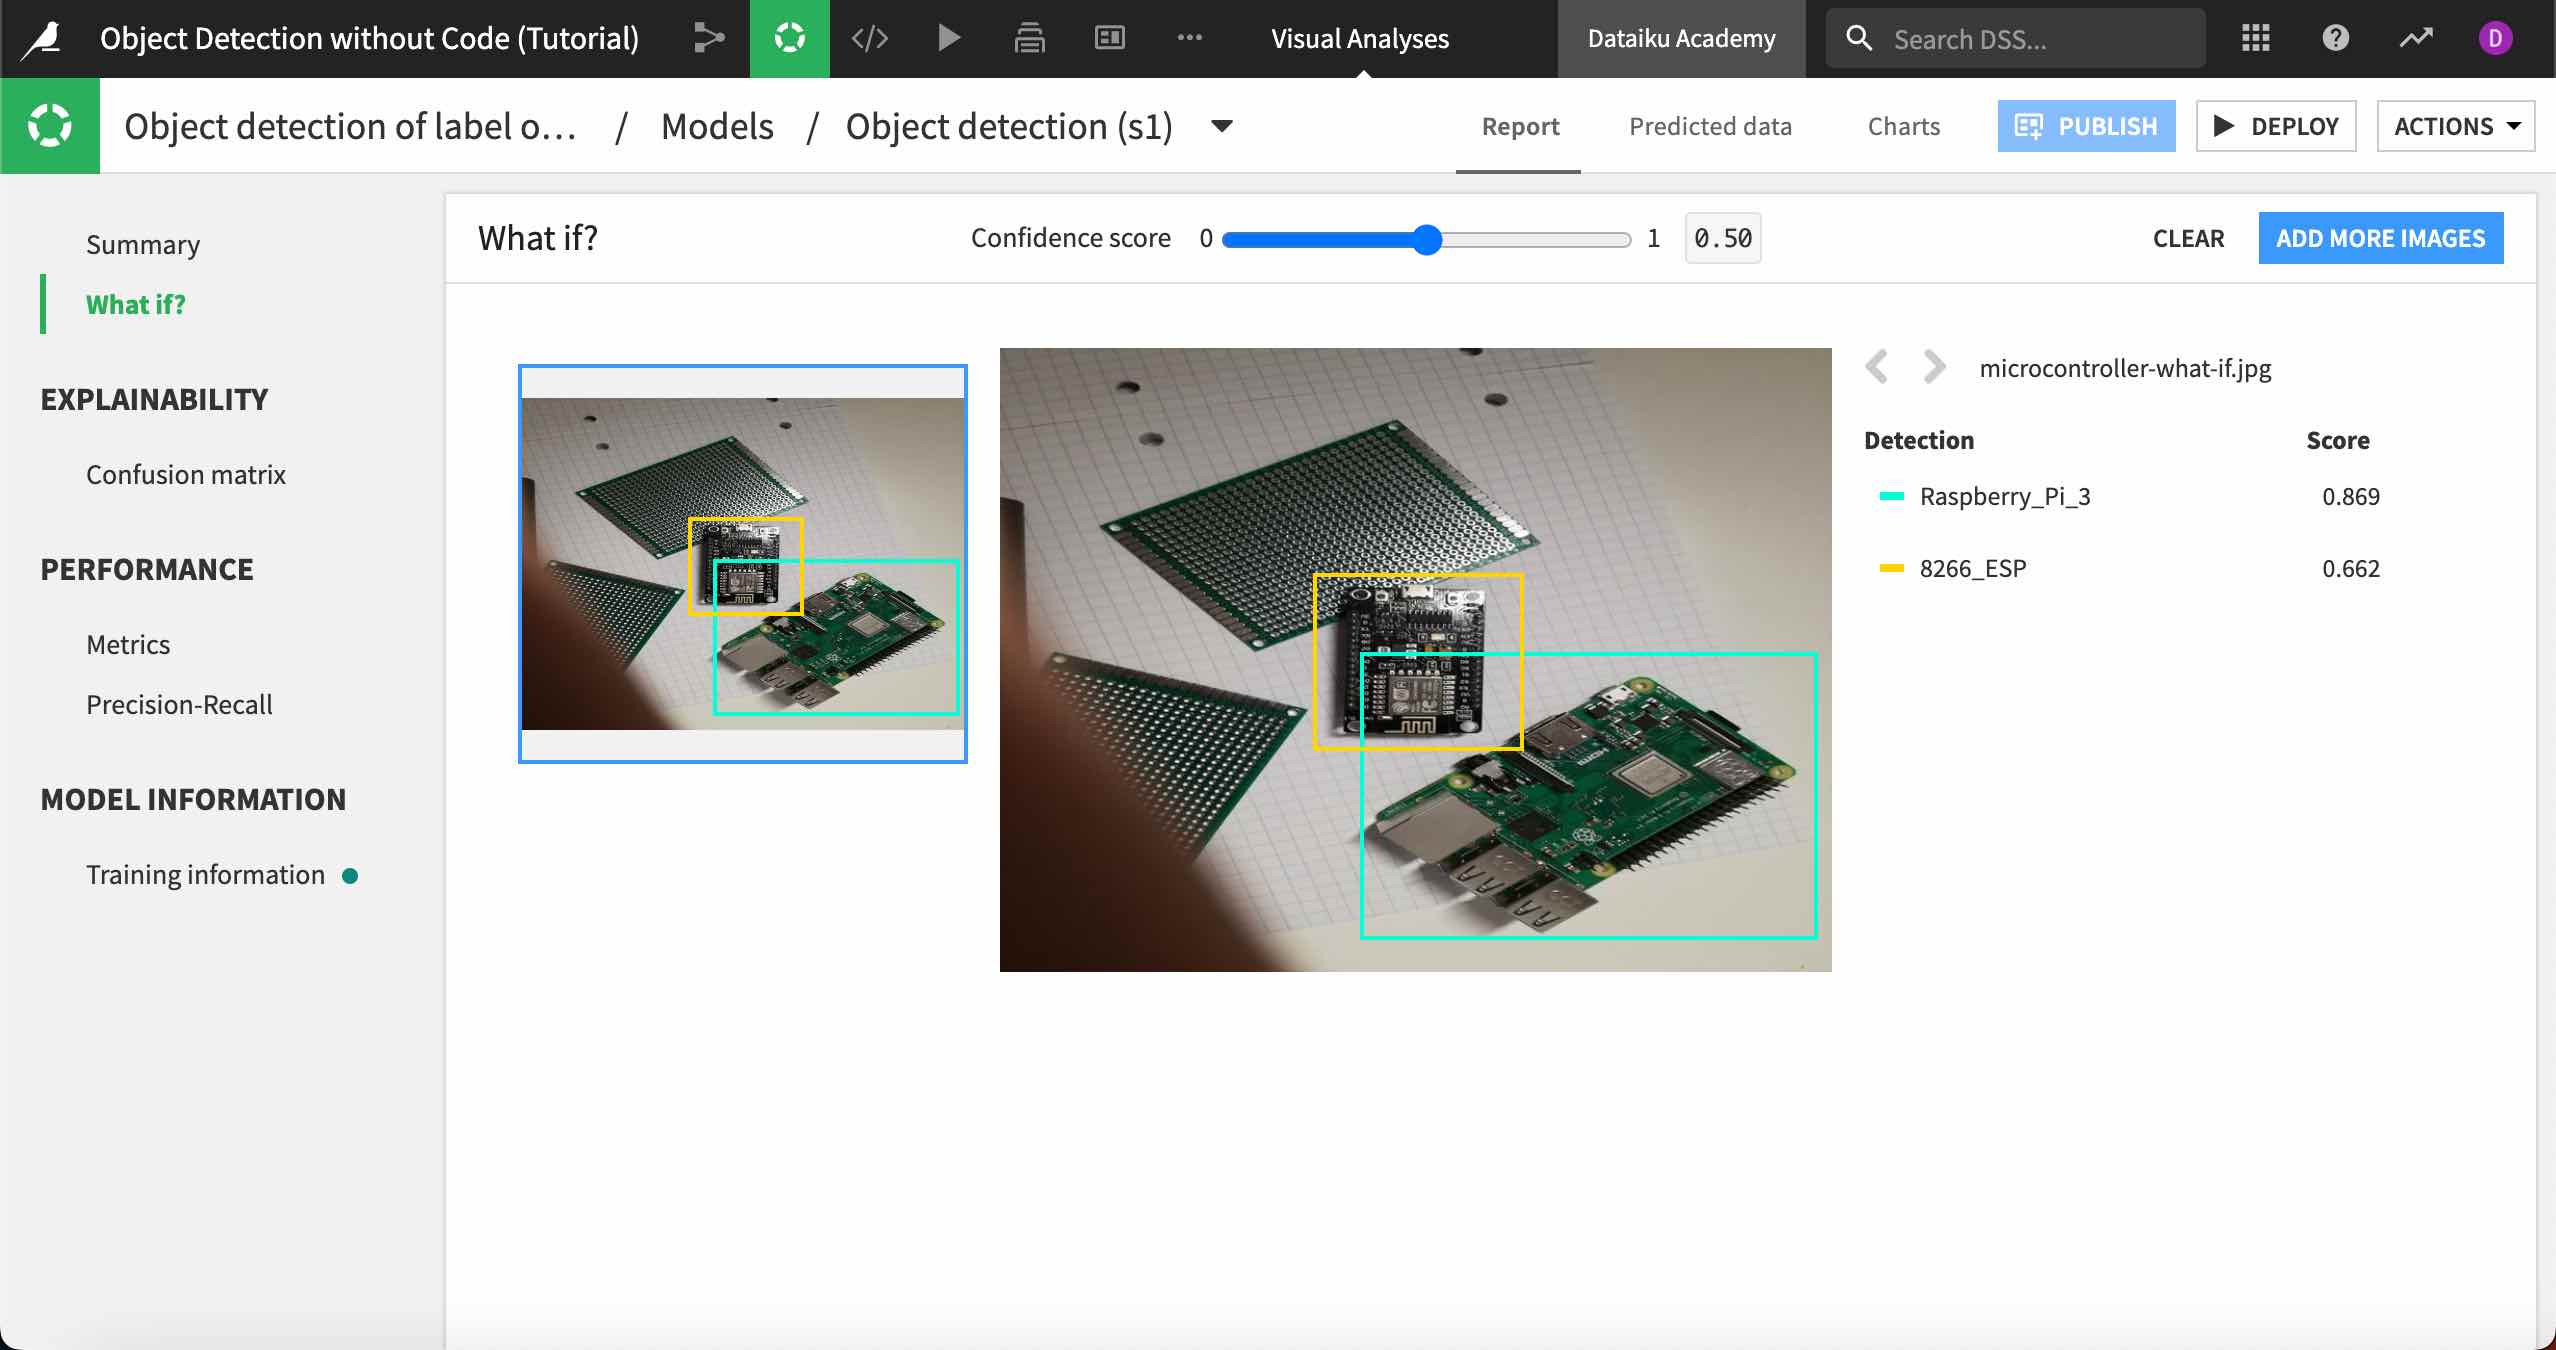 Using the what if feature to detect objects in new images.